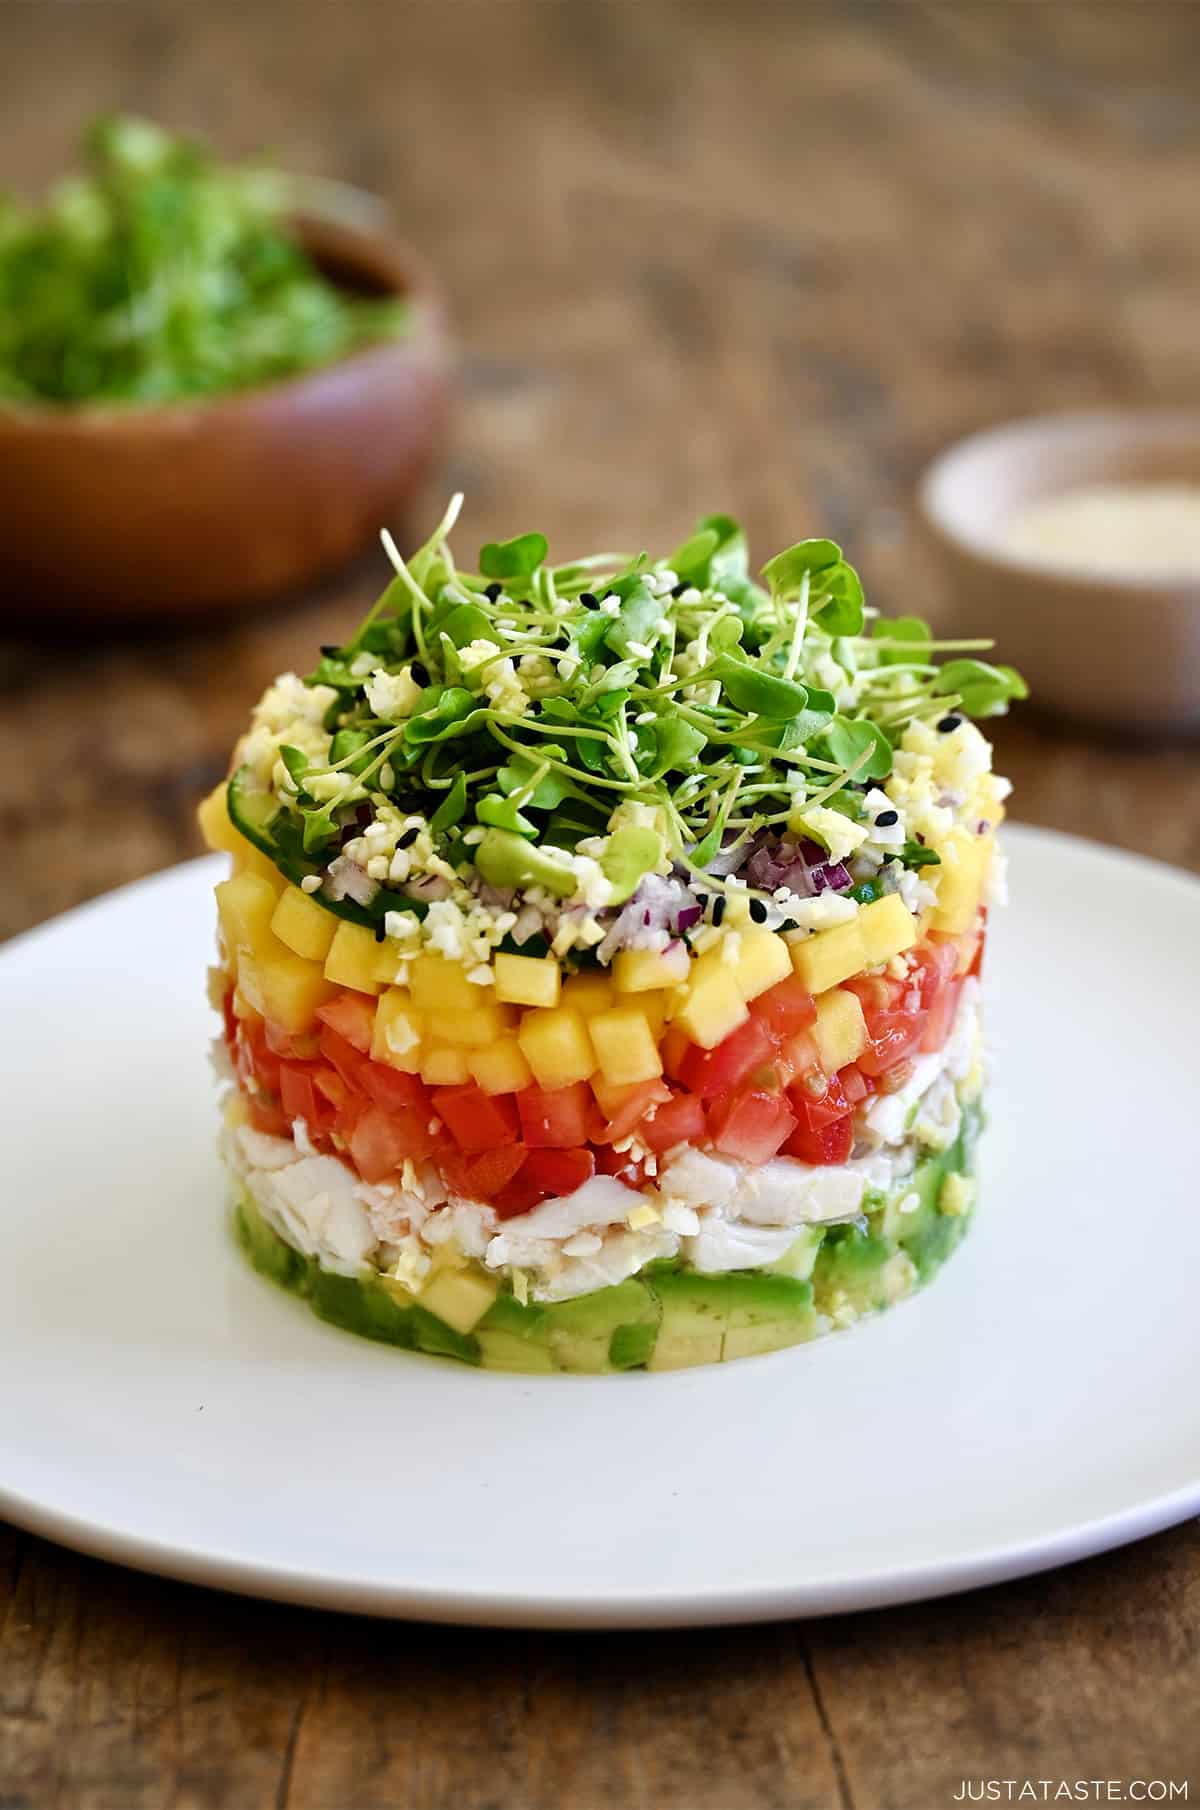 A crab stack with a layers of diced avocado, lump crab meat, diced tomato, diced mango, diced red onion and micro greens.